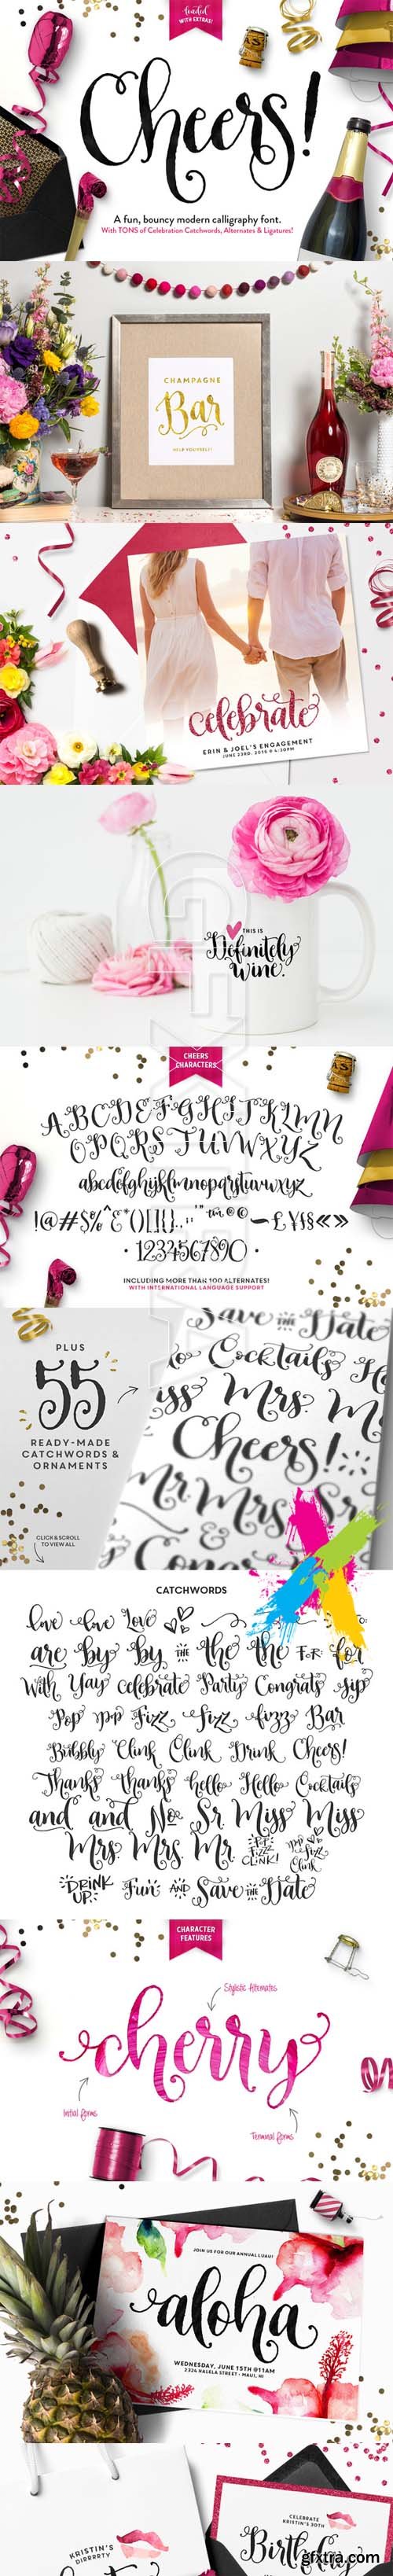 CM - Cheers Font & Graphics Pack